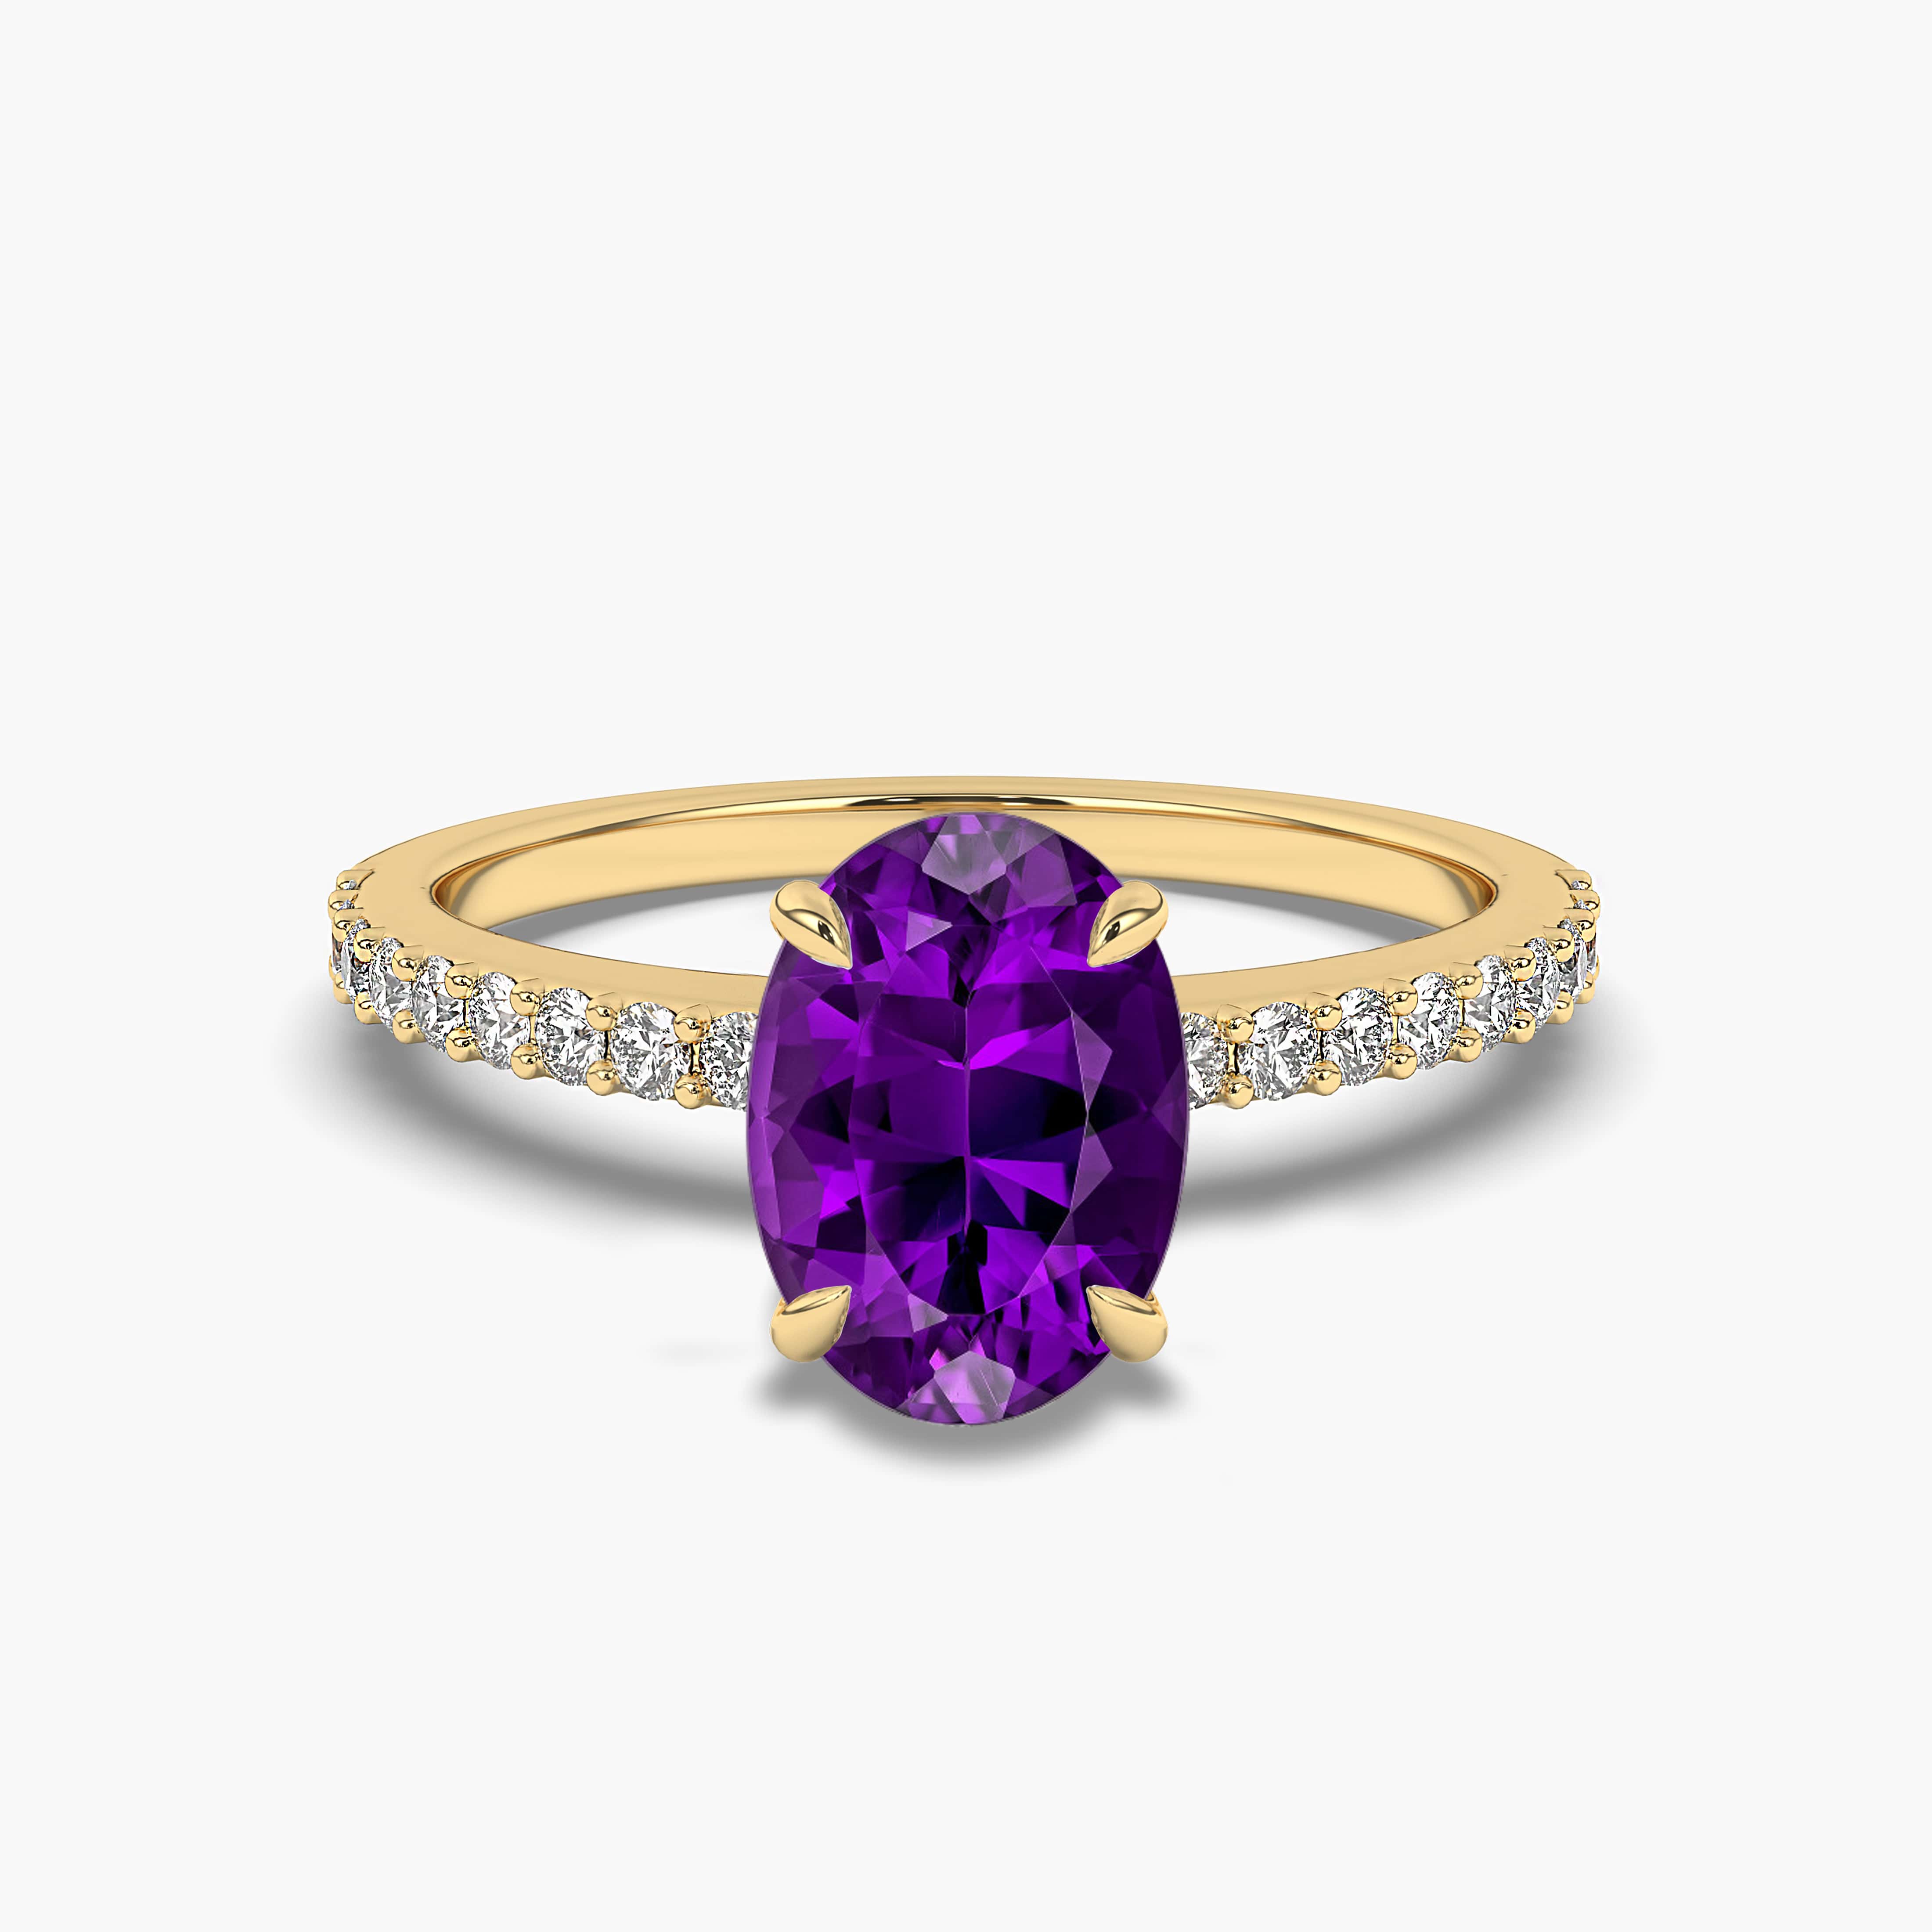 OVAL AMETHYST & DIAMOND SIDE STONE ENGAGEMENT RING YELLOW GOLD